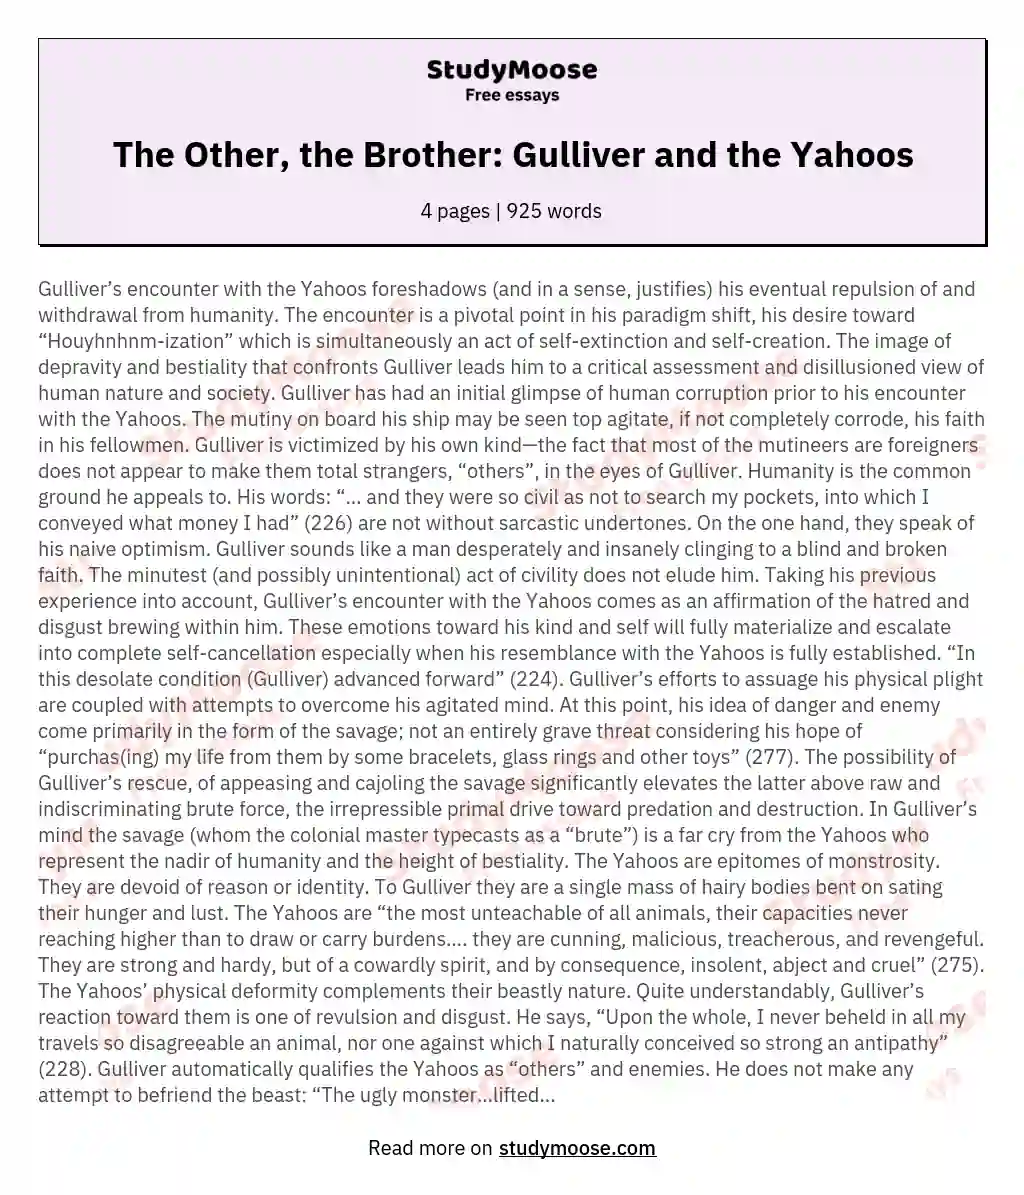 The Other, the Brother: Gulliver and the Yahoos essay